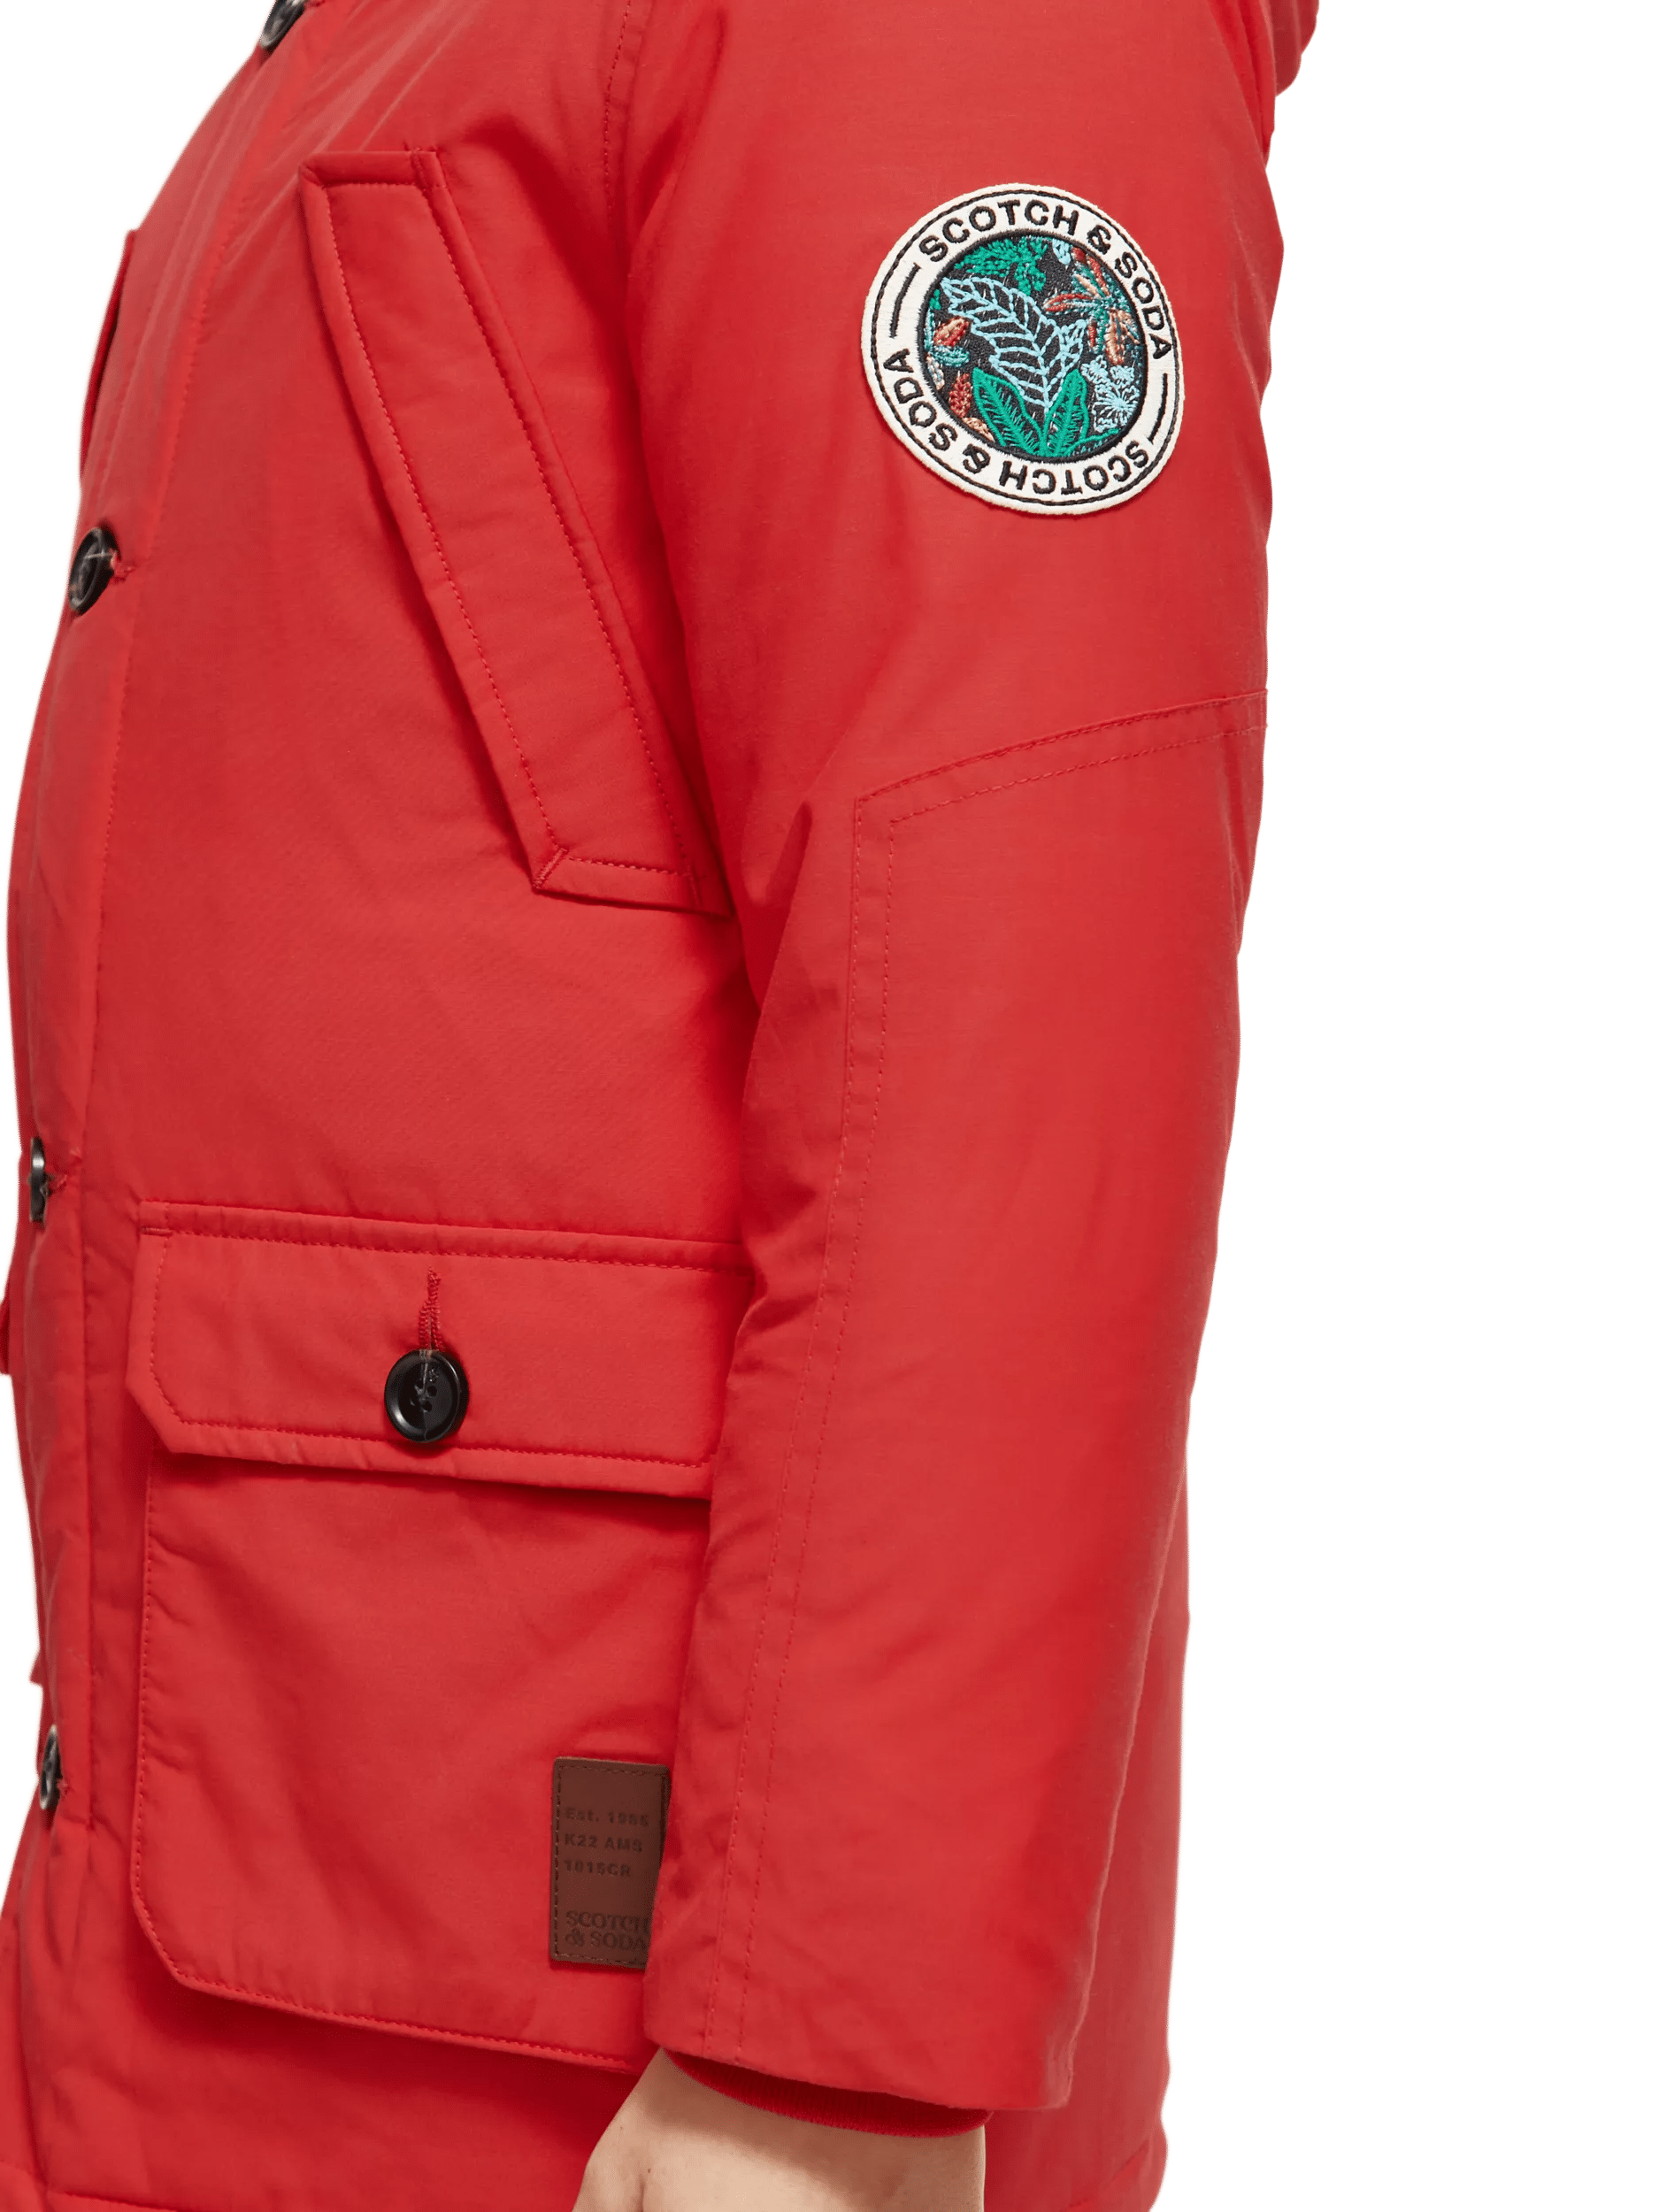 Scotch & Soda Longer length water repellent jacket with Repreve -  filling MDL-DTL1